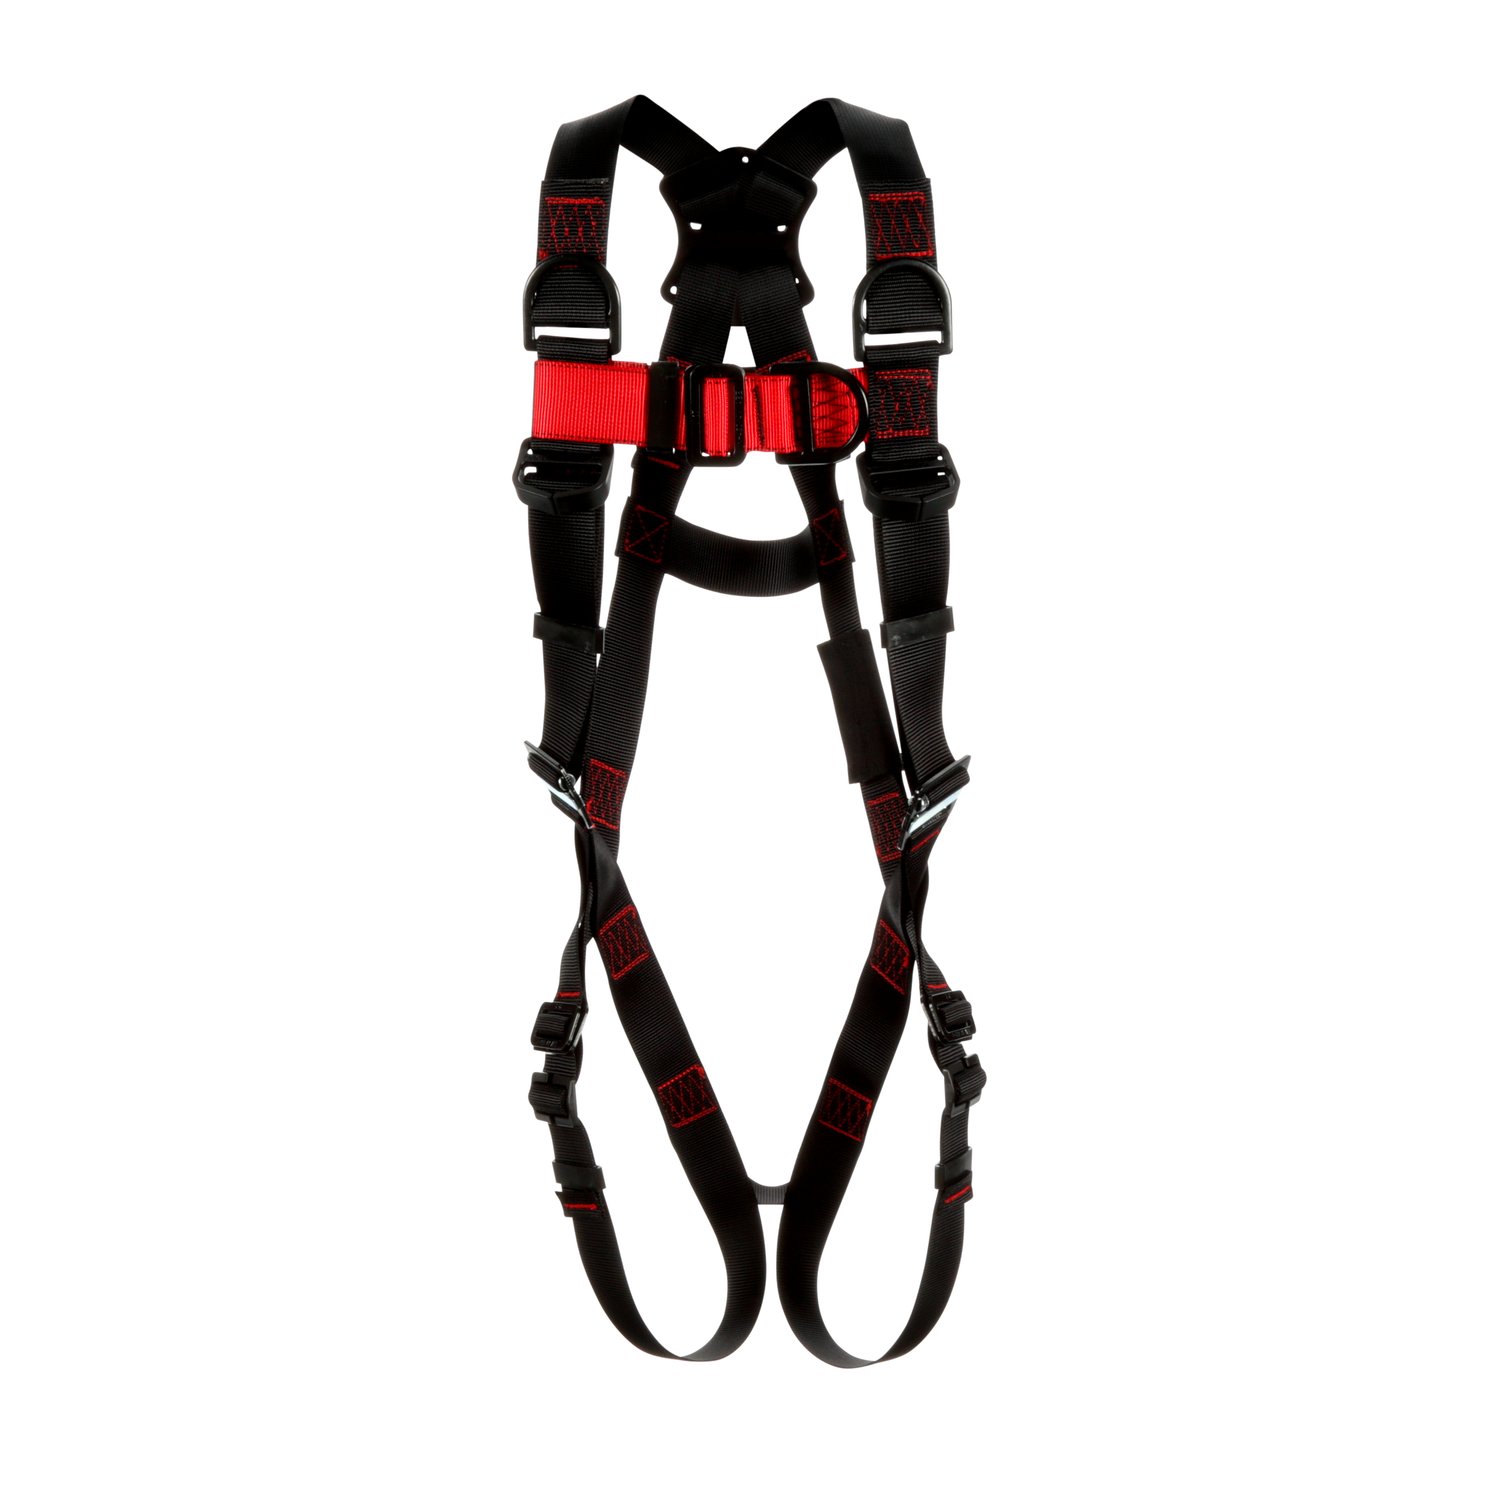 7012816764 - 3M Protecta P200 Vest Climbing/Rescue Safety Harness 1161518, Medium/Large